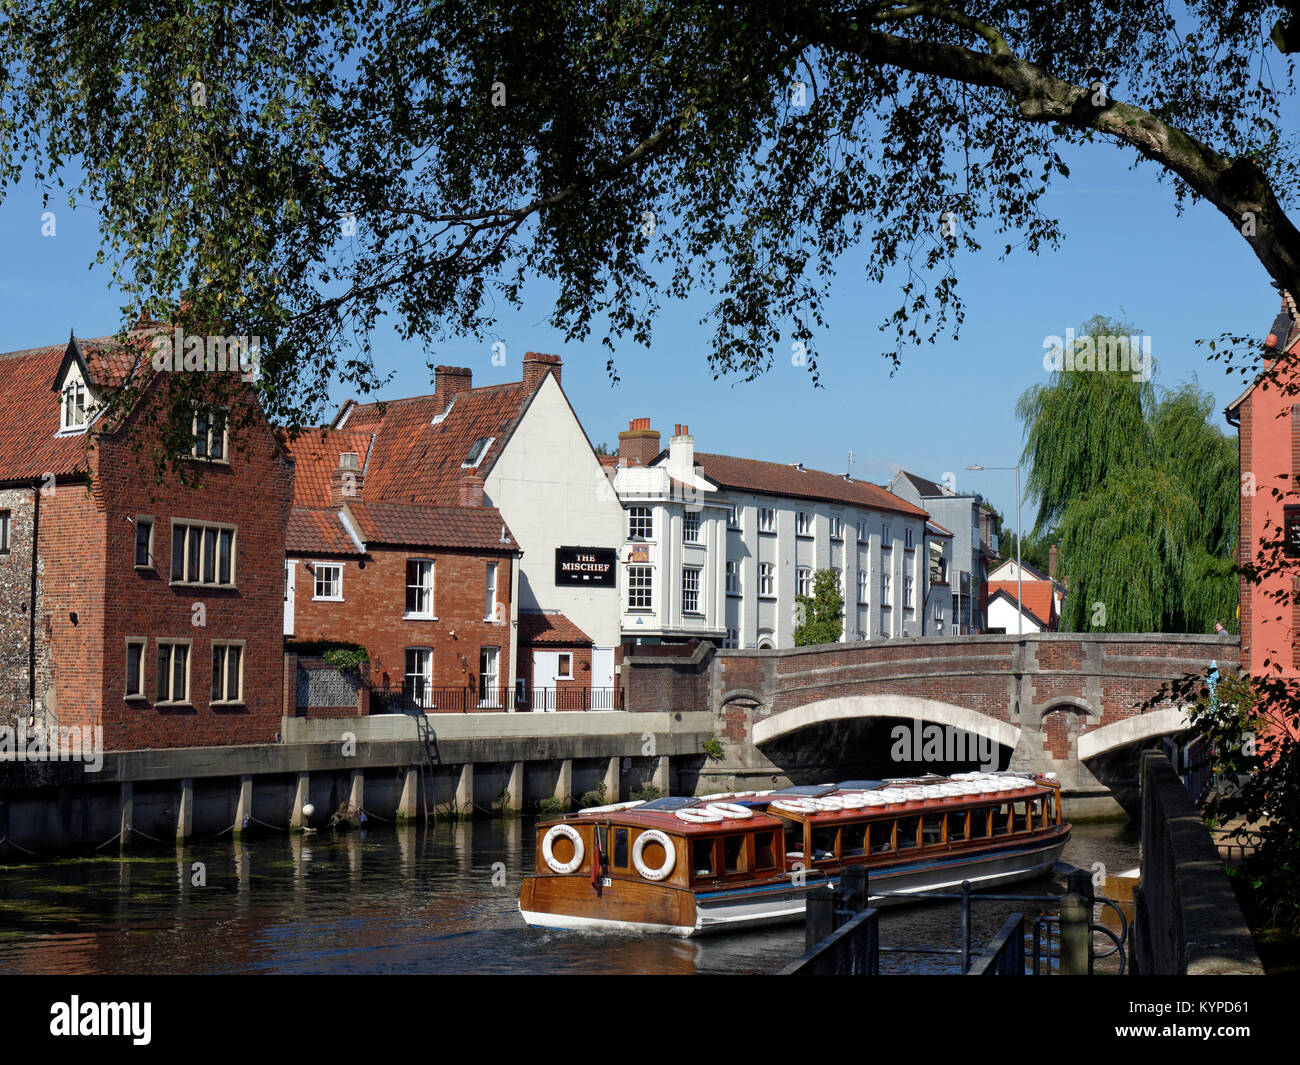 Sightseeing Tourist Boat on The River Wensum in the Center of The Historic City of Norwich, Norfolk, England, UK Stock Photo